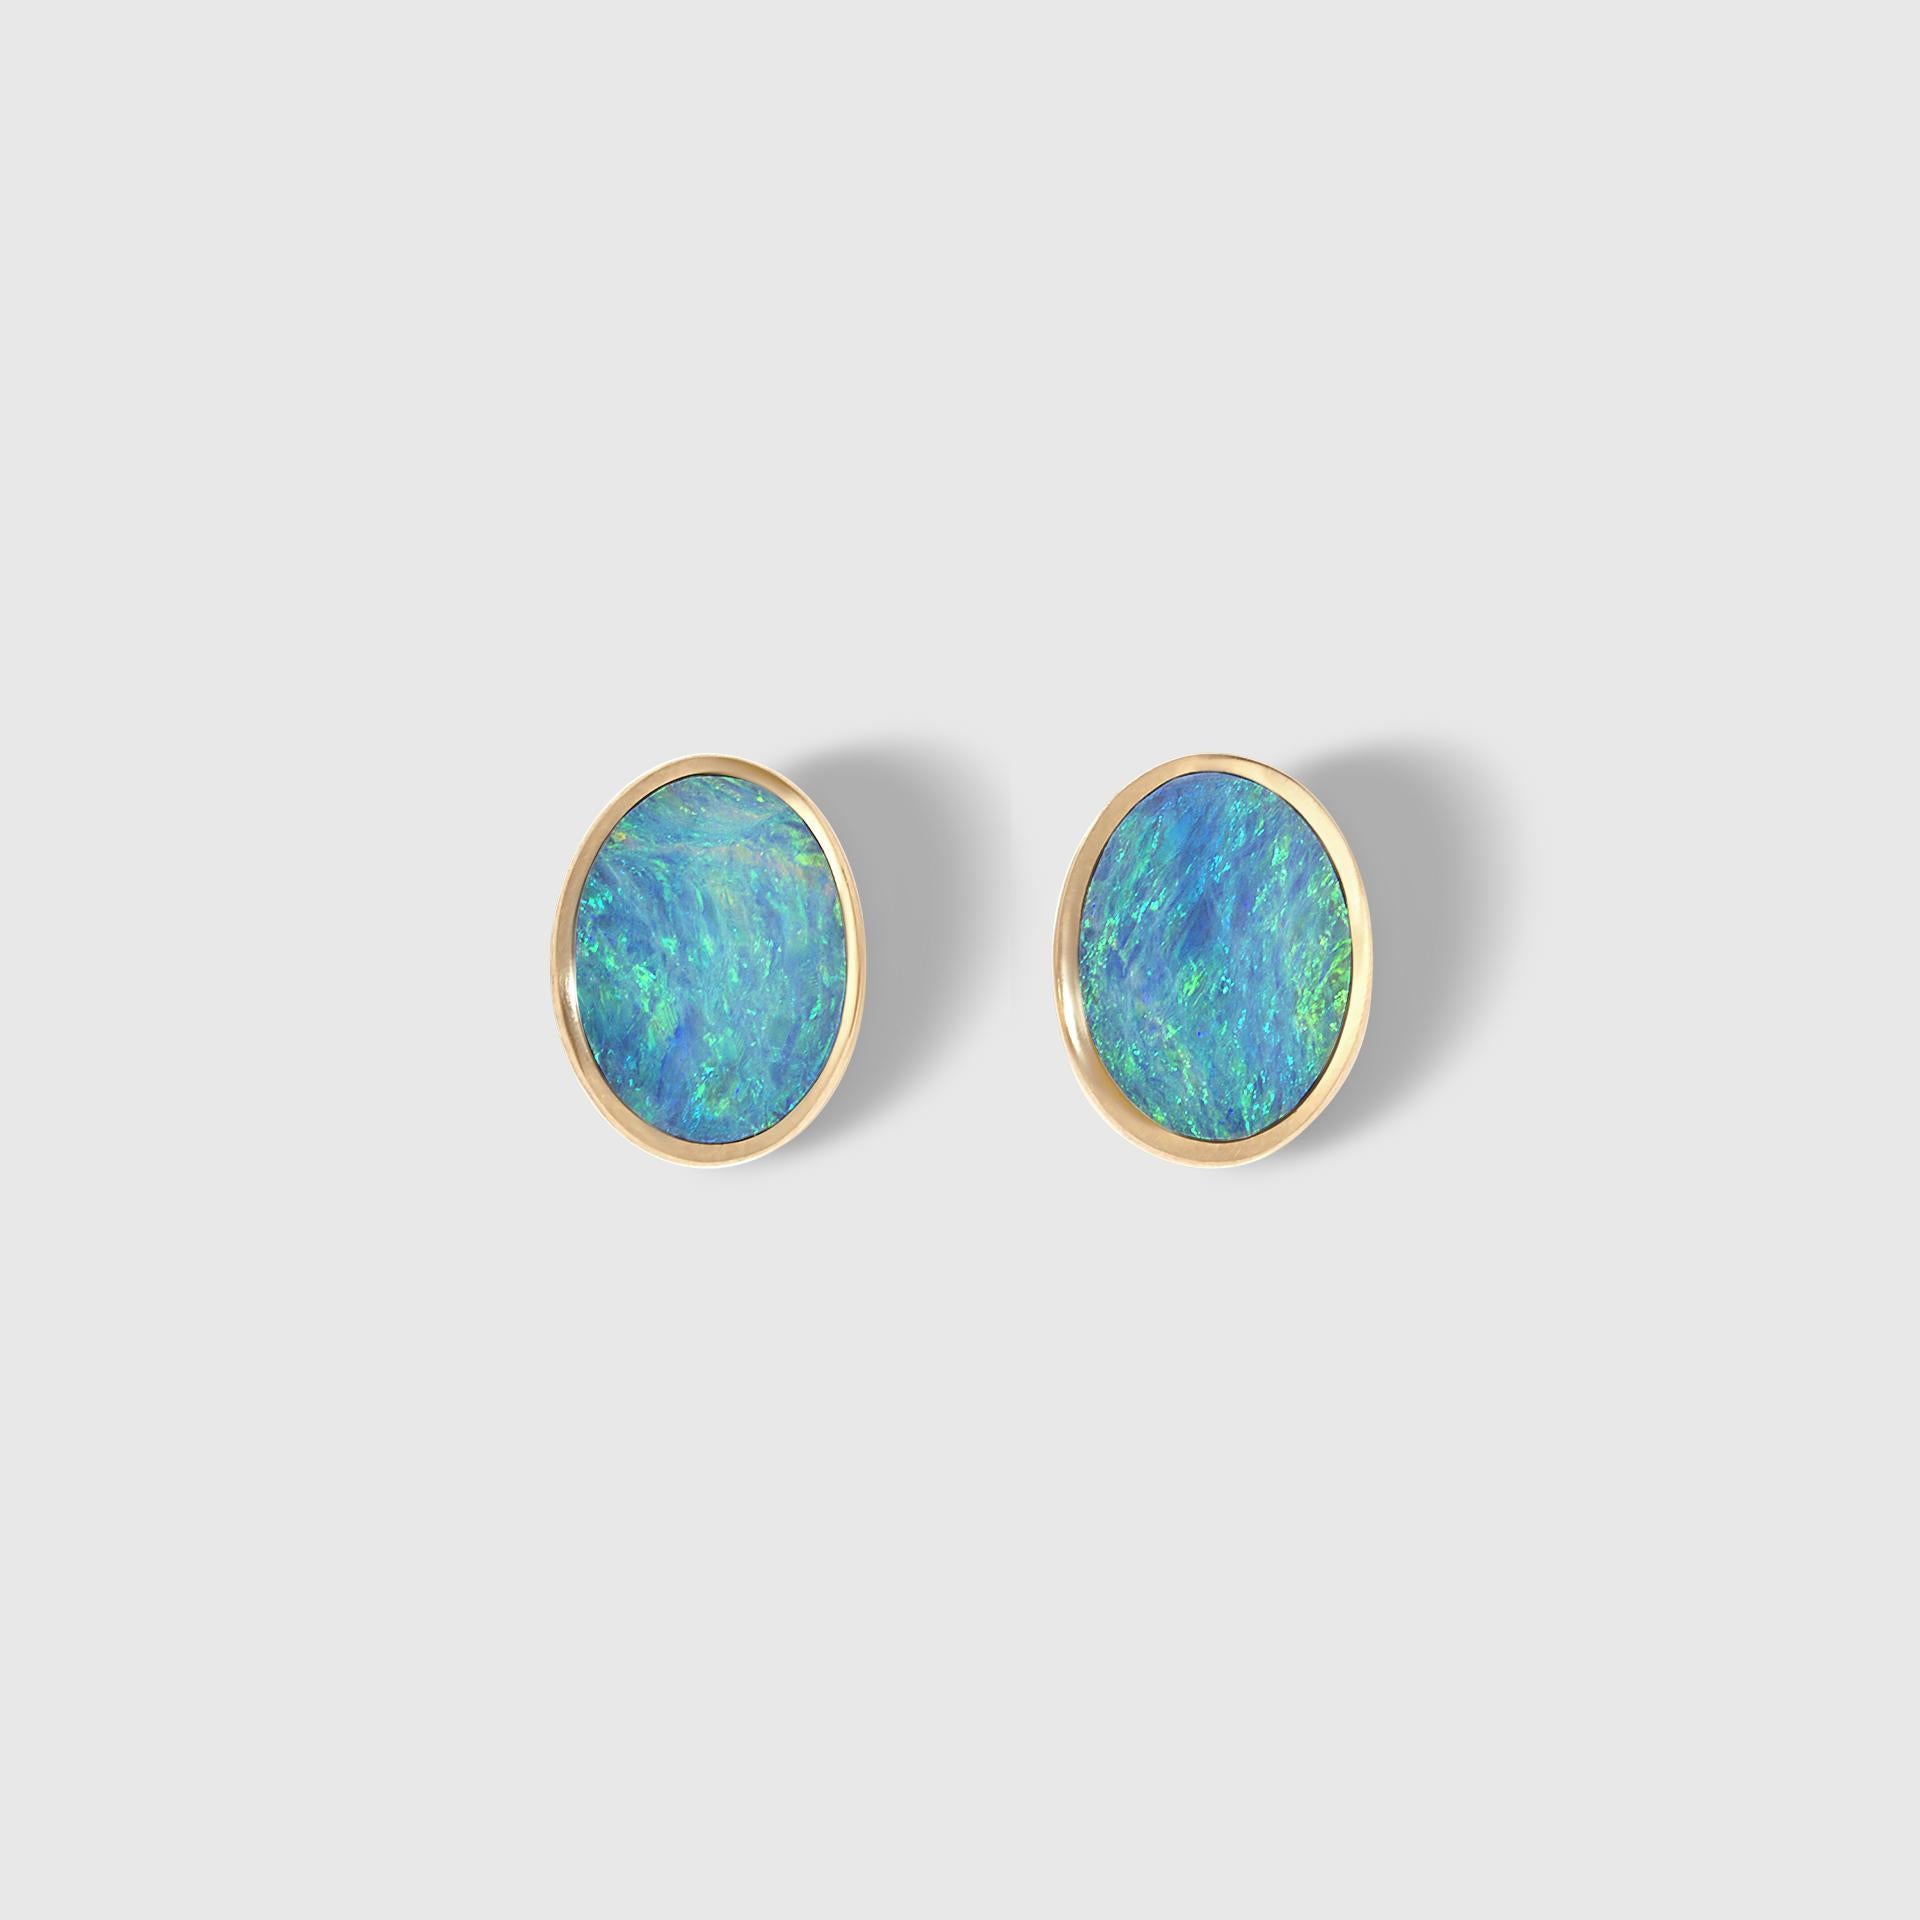 Contemporary High Grade 'Five-Star' Oval, Australian Opal Post Earrings, 14kt Gold by Kabana For Sale